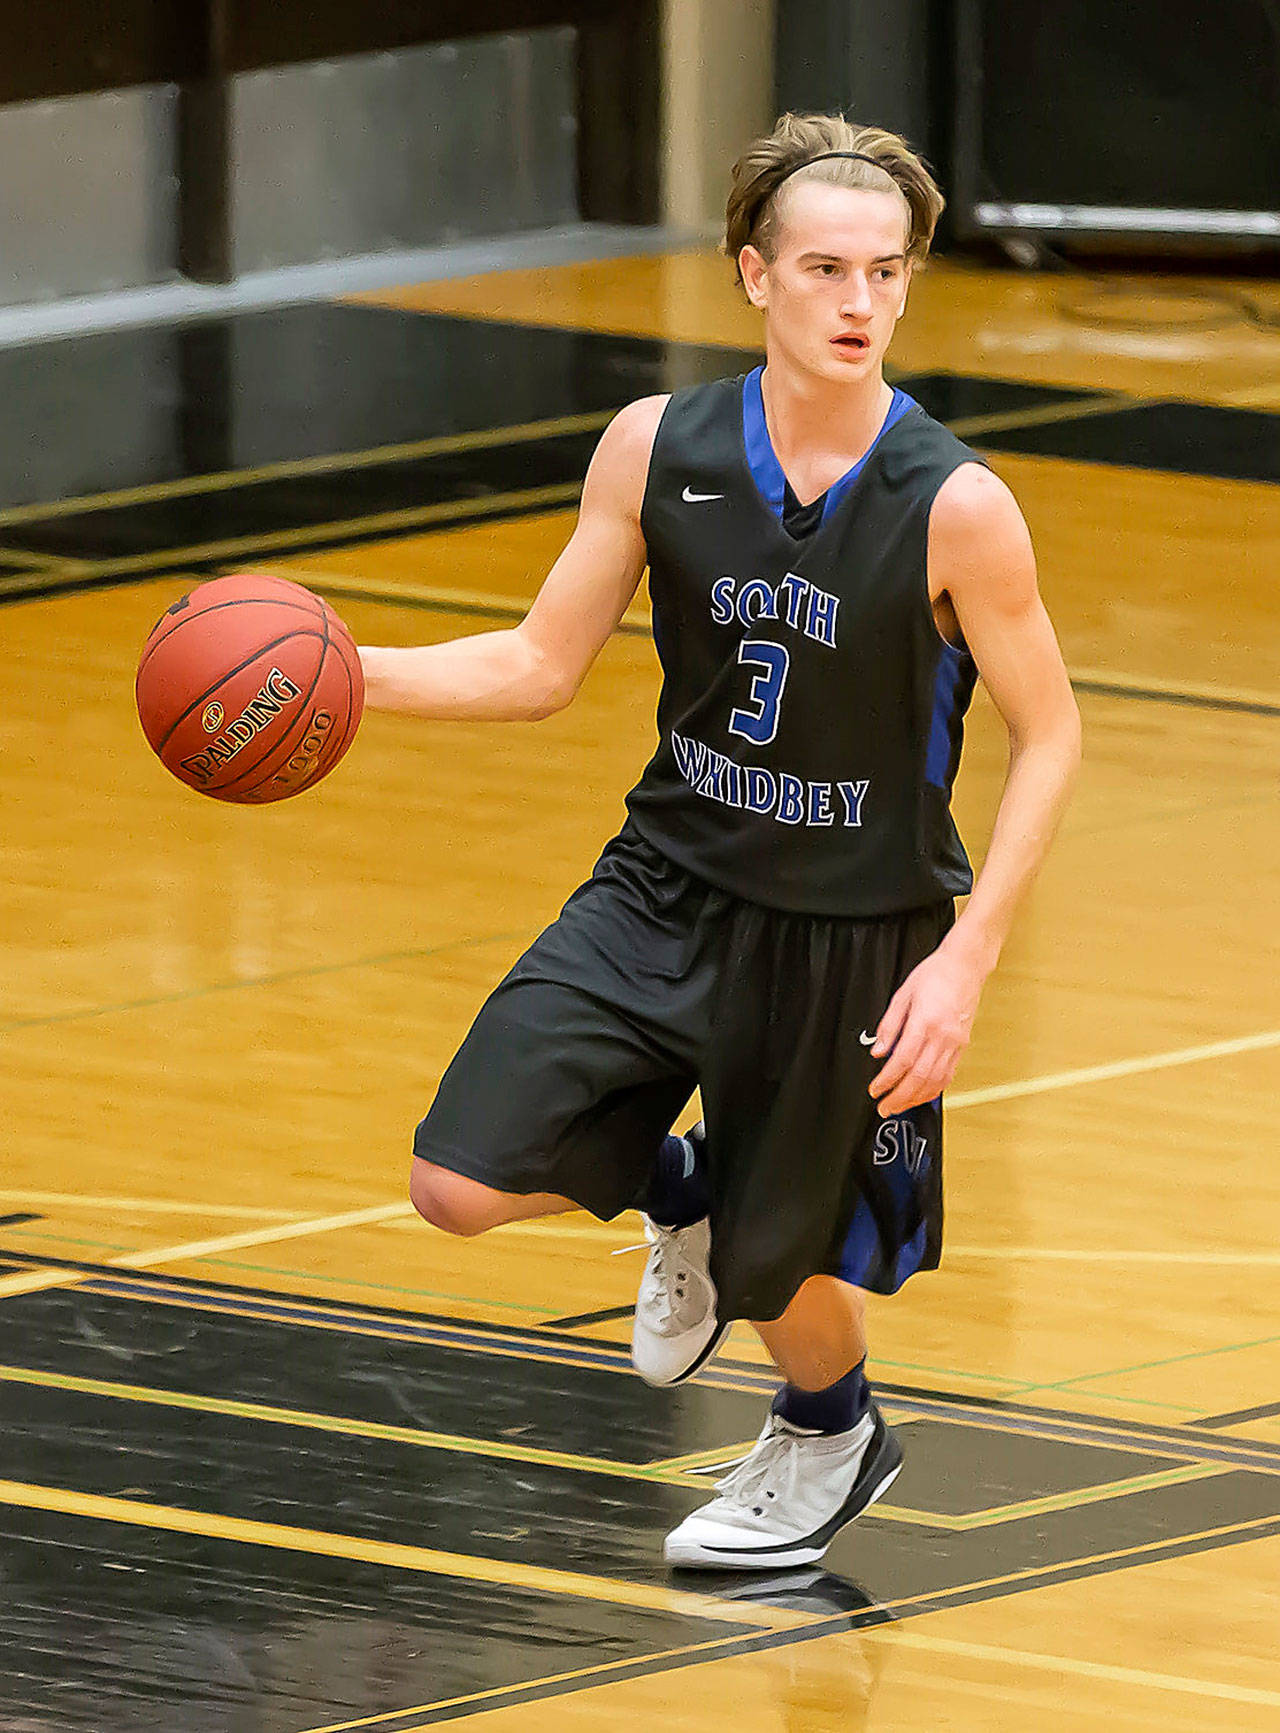 Kody Newman received three different athletic awards from South Whidbey High School last week. (Photo by John Fisken)